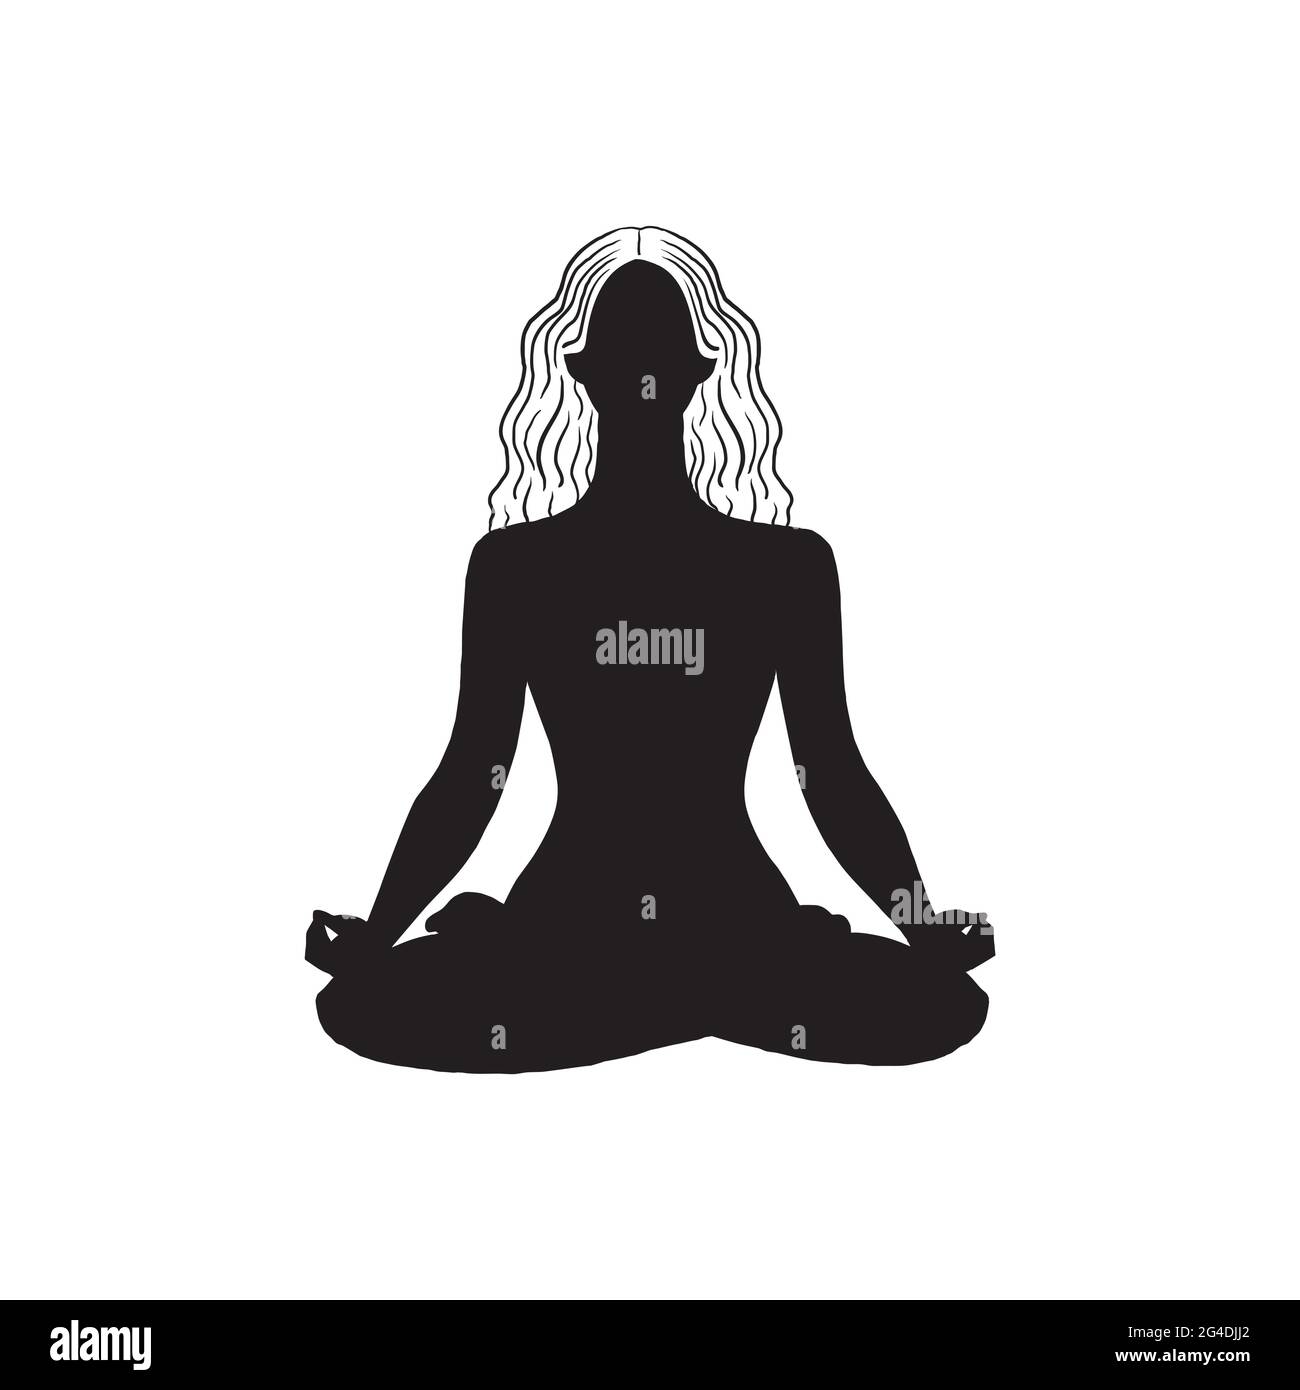 Black isolated silhouette of woman in lotus position on white background.Stock illustration. Stock Vector